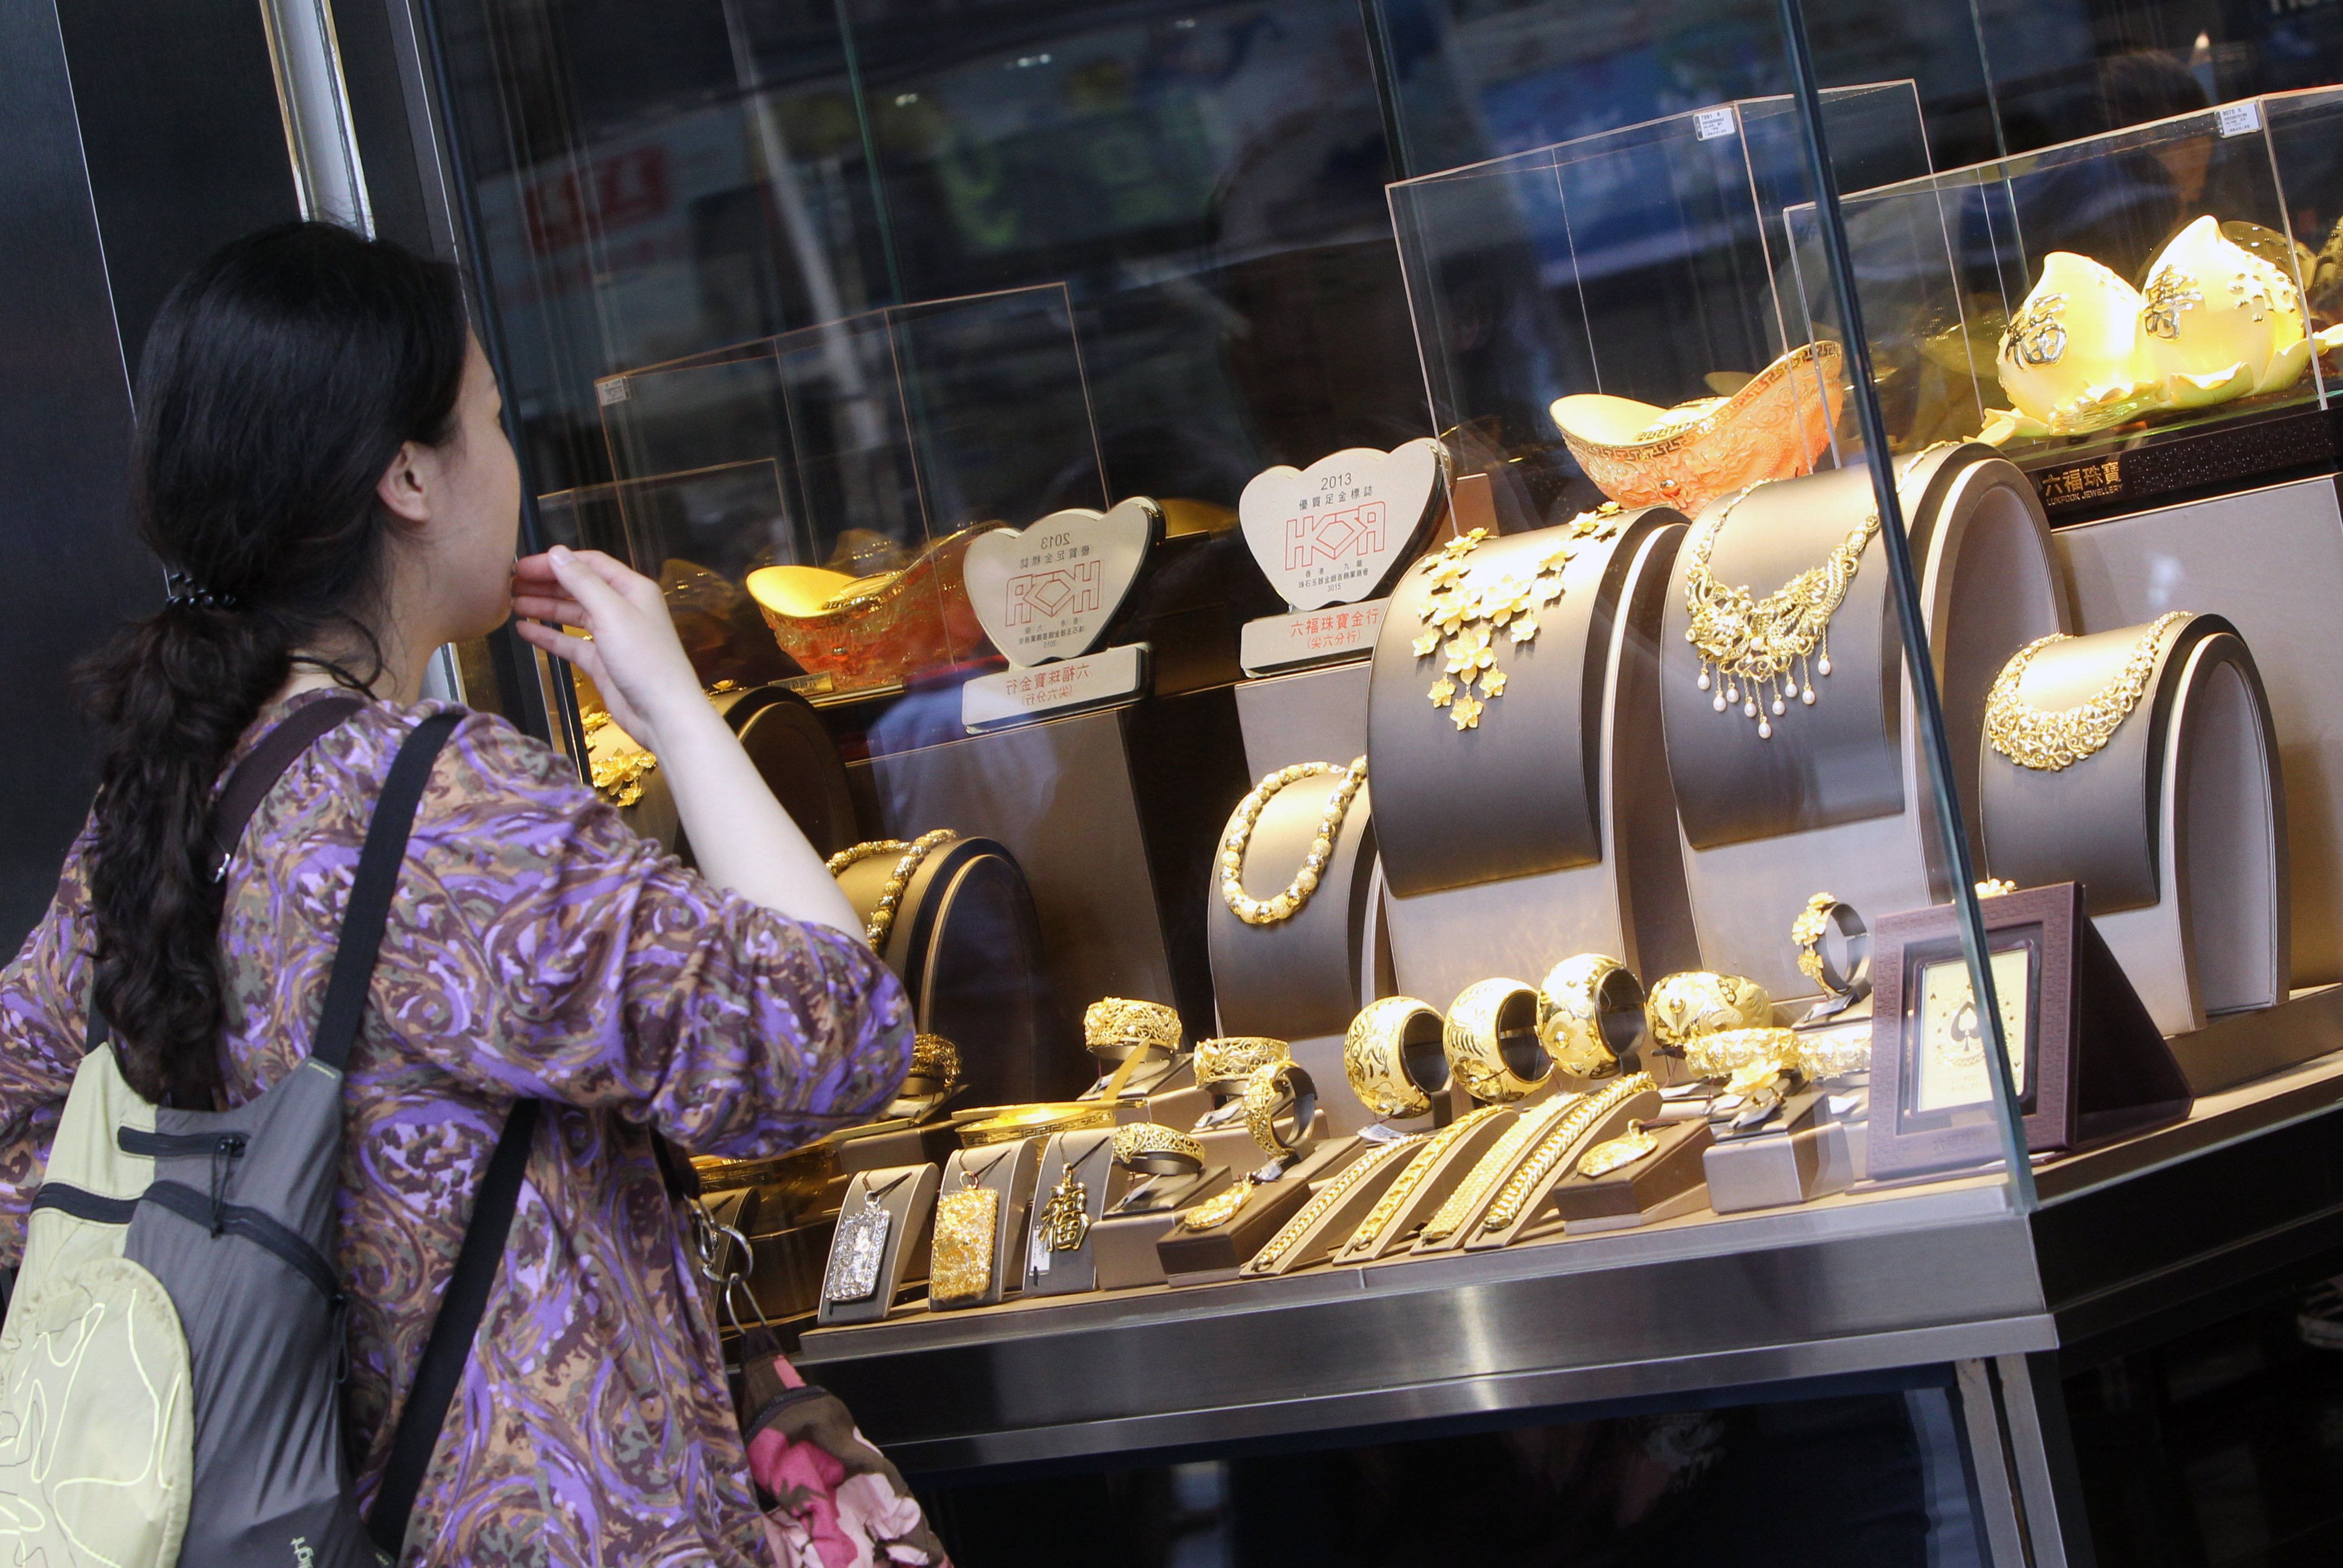 A woman looks at gold products in a jewellery shop in Tsim Sha Tsui. Gold prices were under pressure in Asian trade after the precious metal suffered its biggest dive in more than 30 years. 16APR13